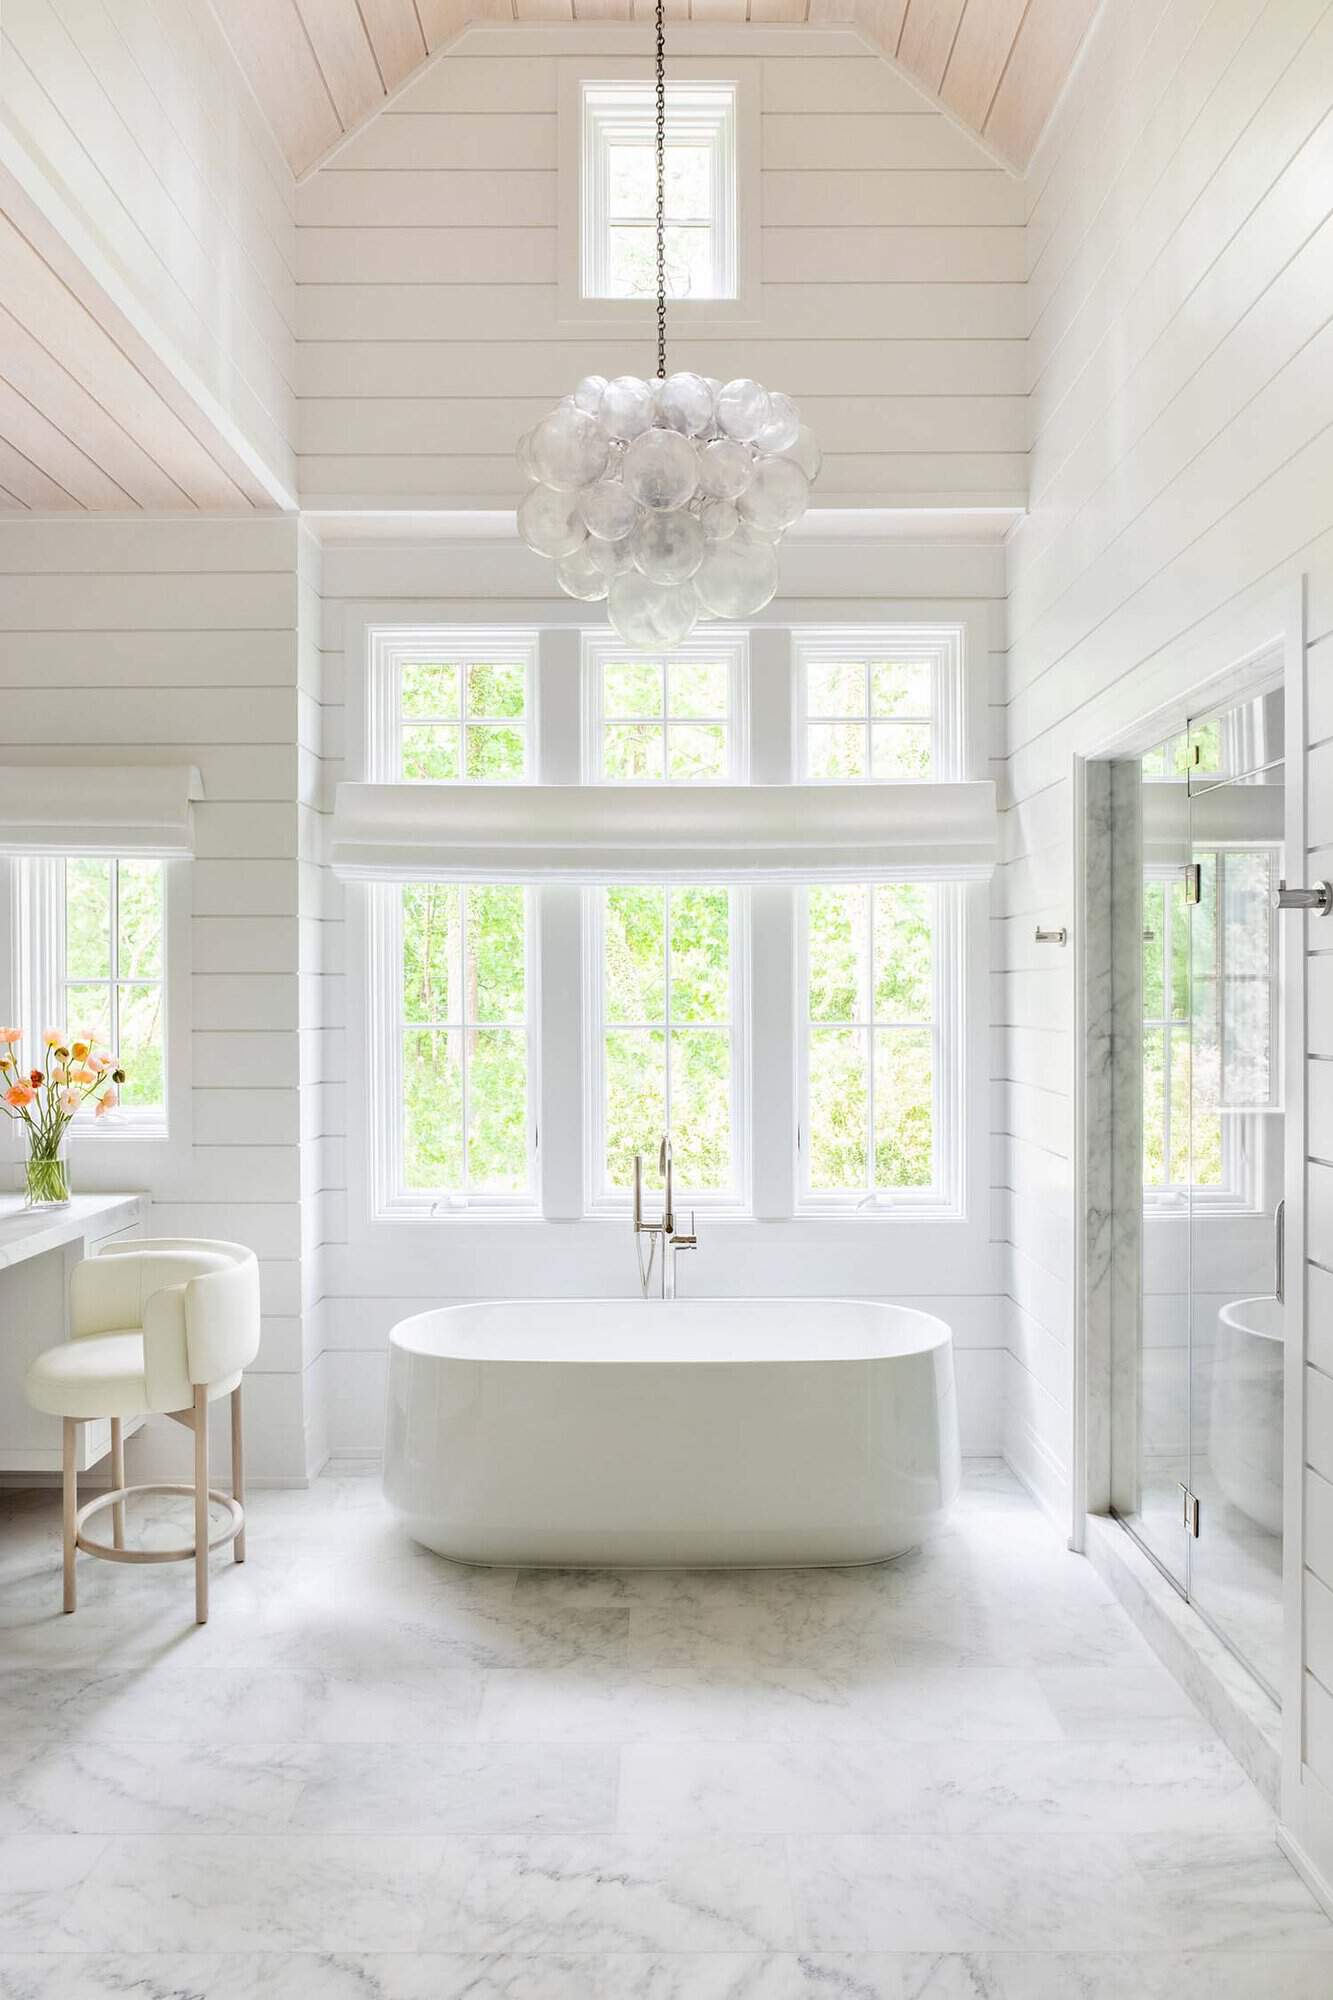 transitional style bathroom with a freestanding tub